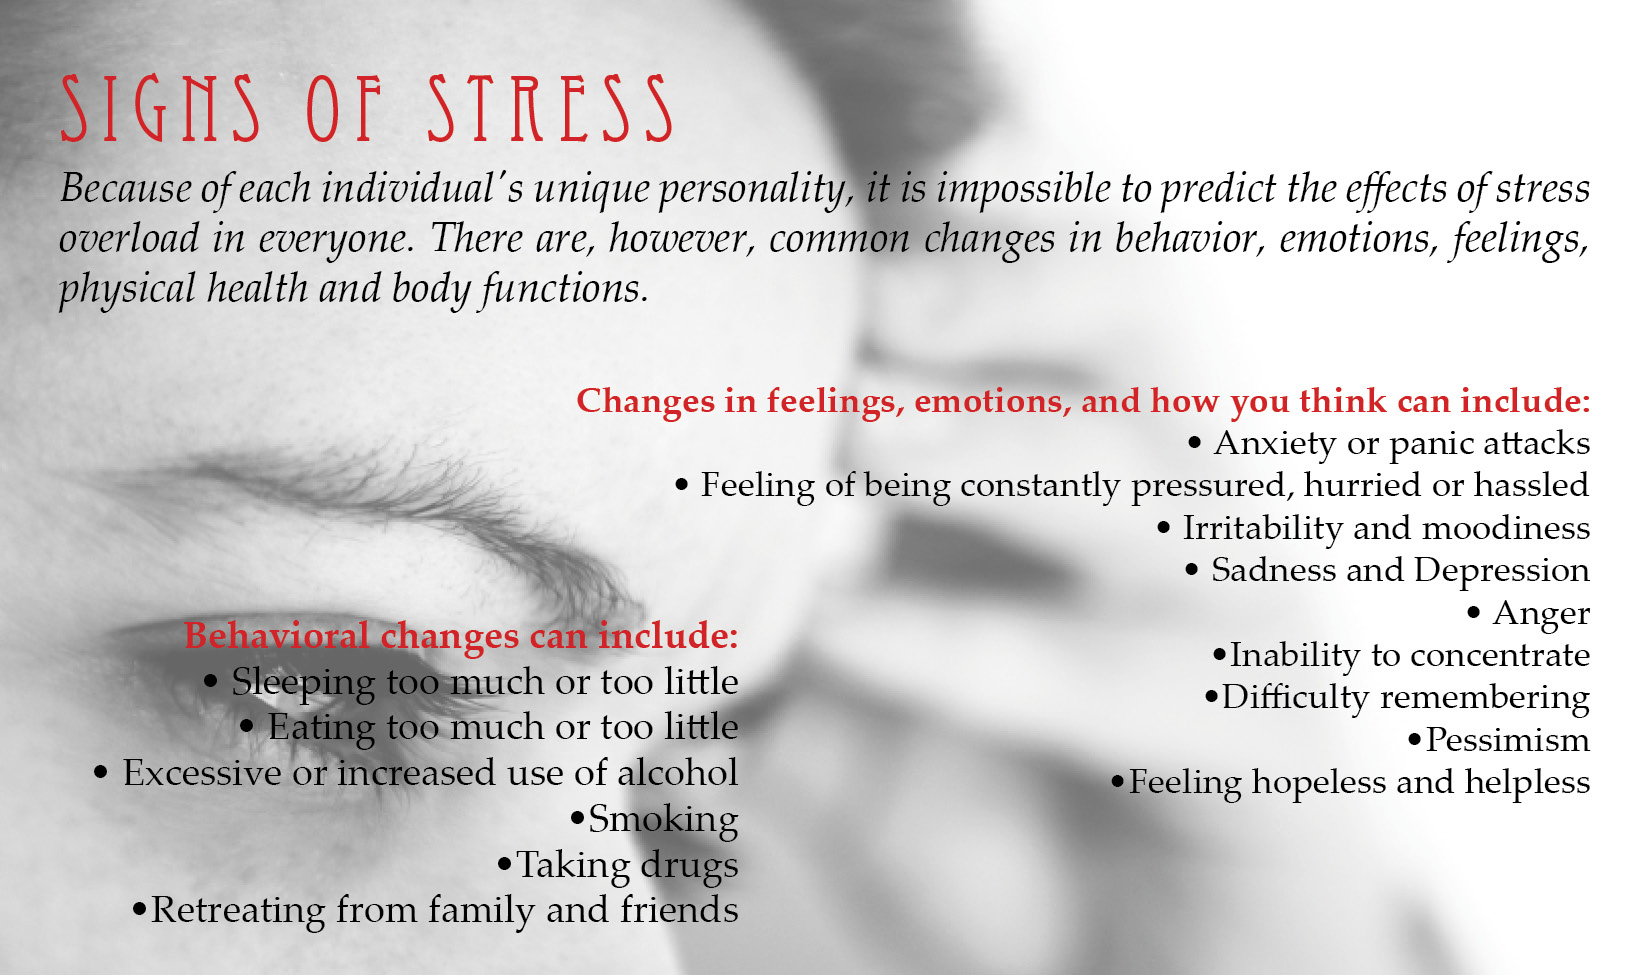 image displaying several signs of stress